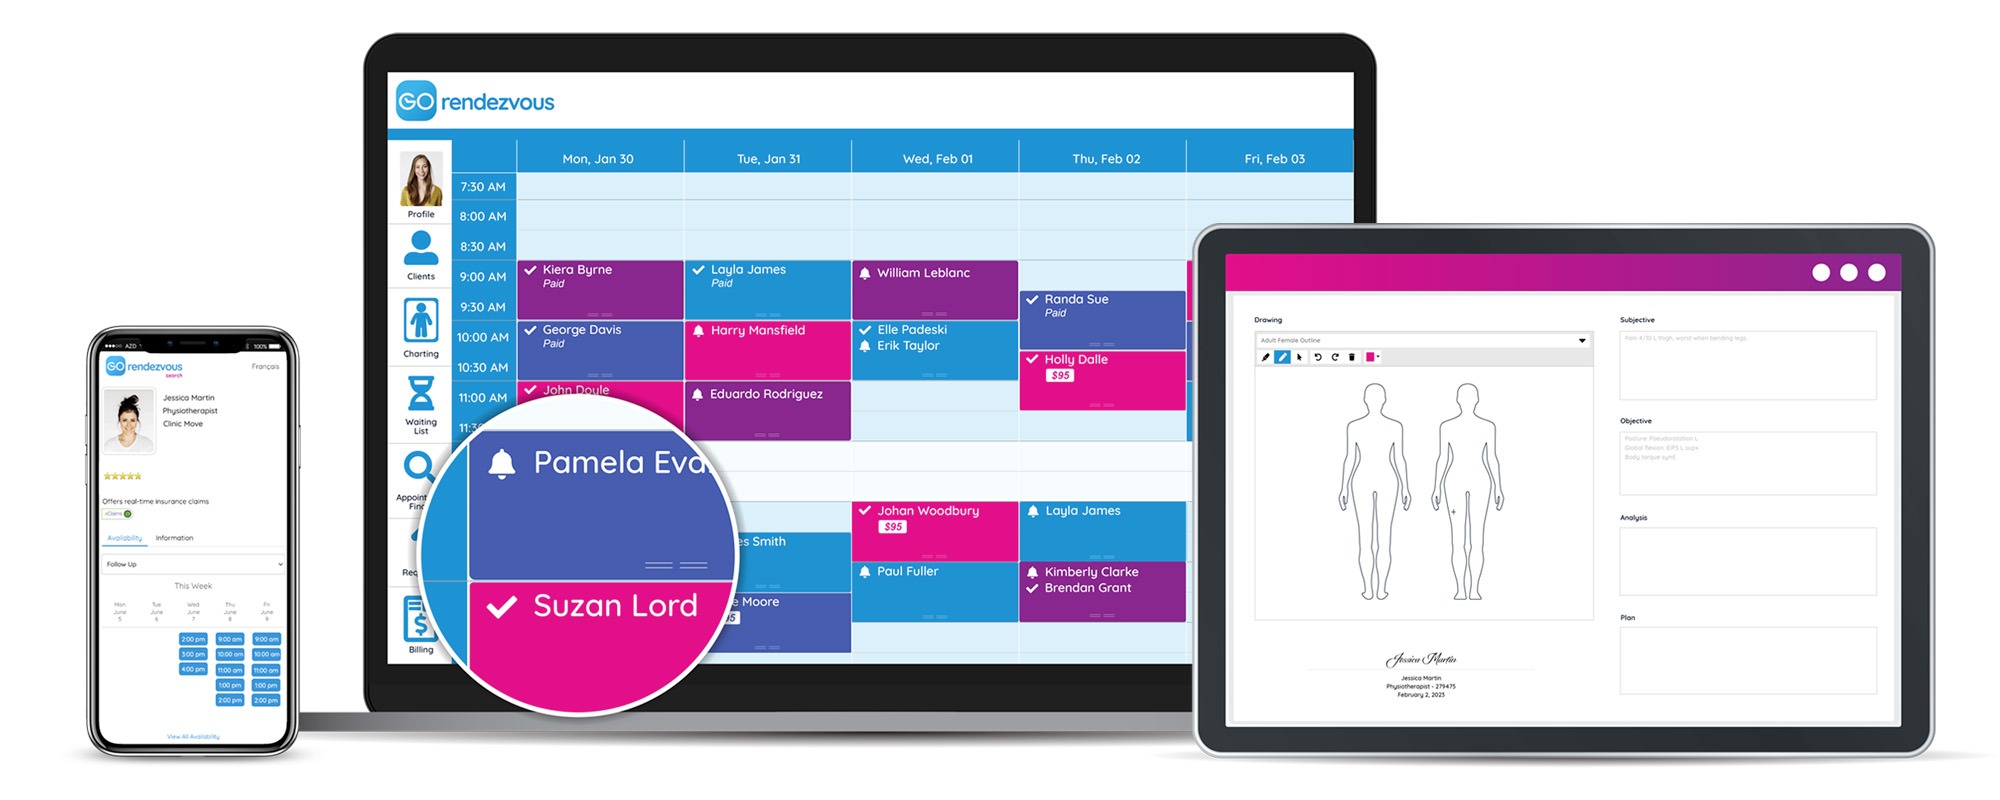 A view of an orthotherapist's GOrendezvous schedule on different devices